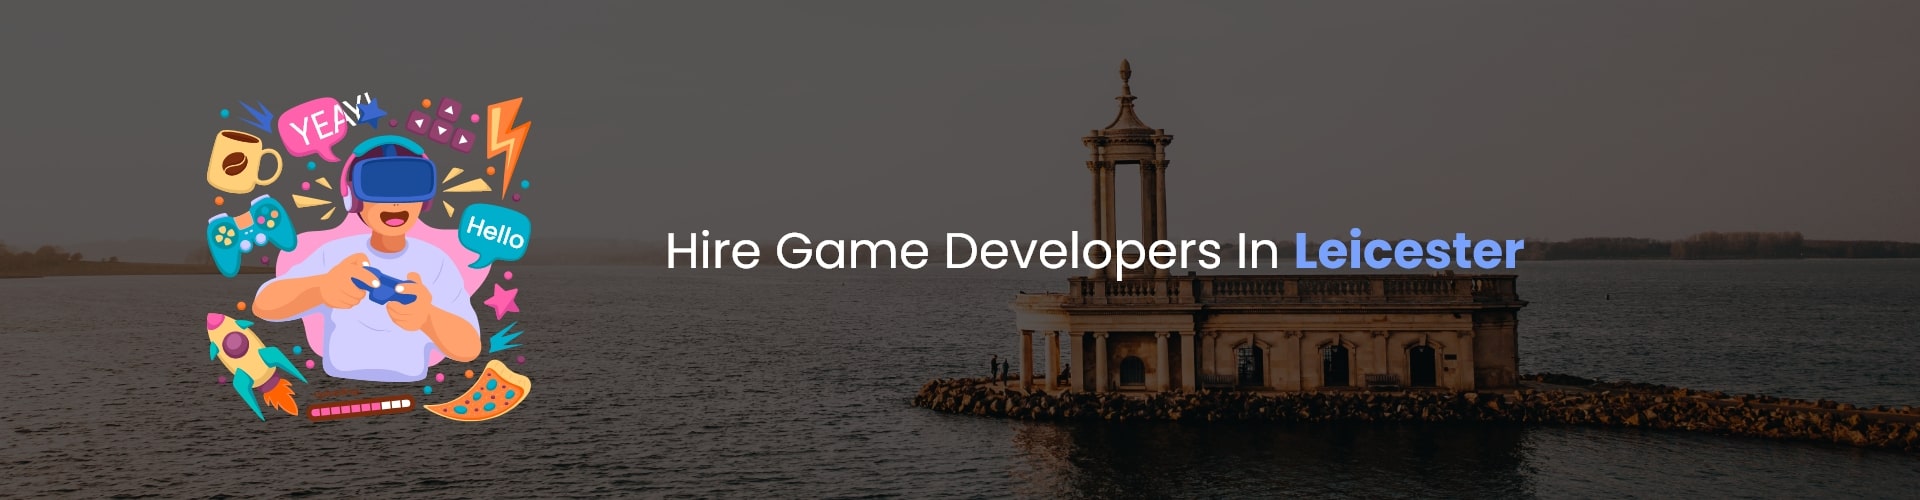 hire game developers in leicester